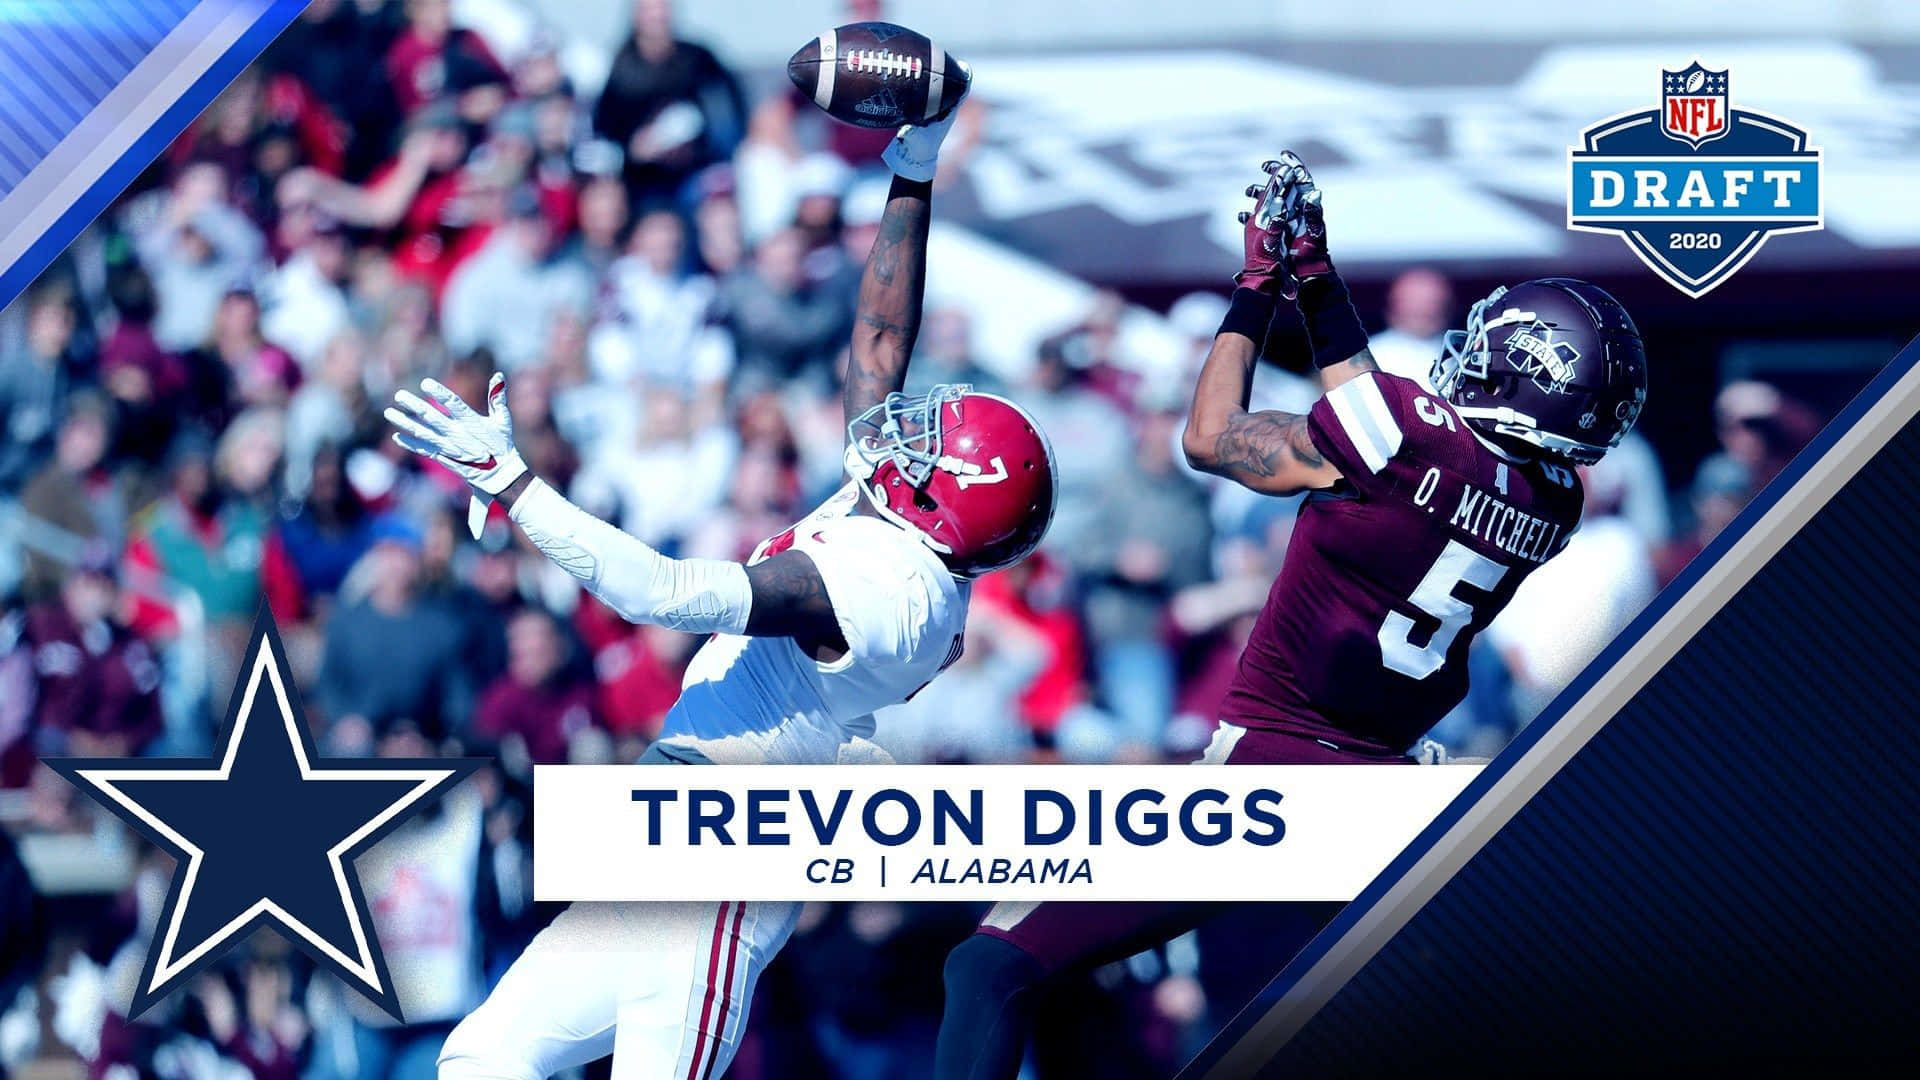 Trevon Diggs Wallpapers  Top 33 Best Trevon Diggs Wallpapers  HQ 